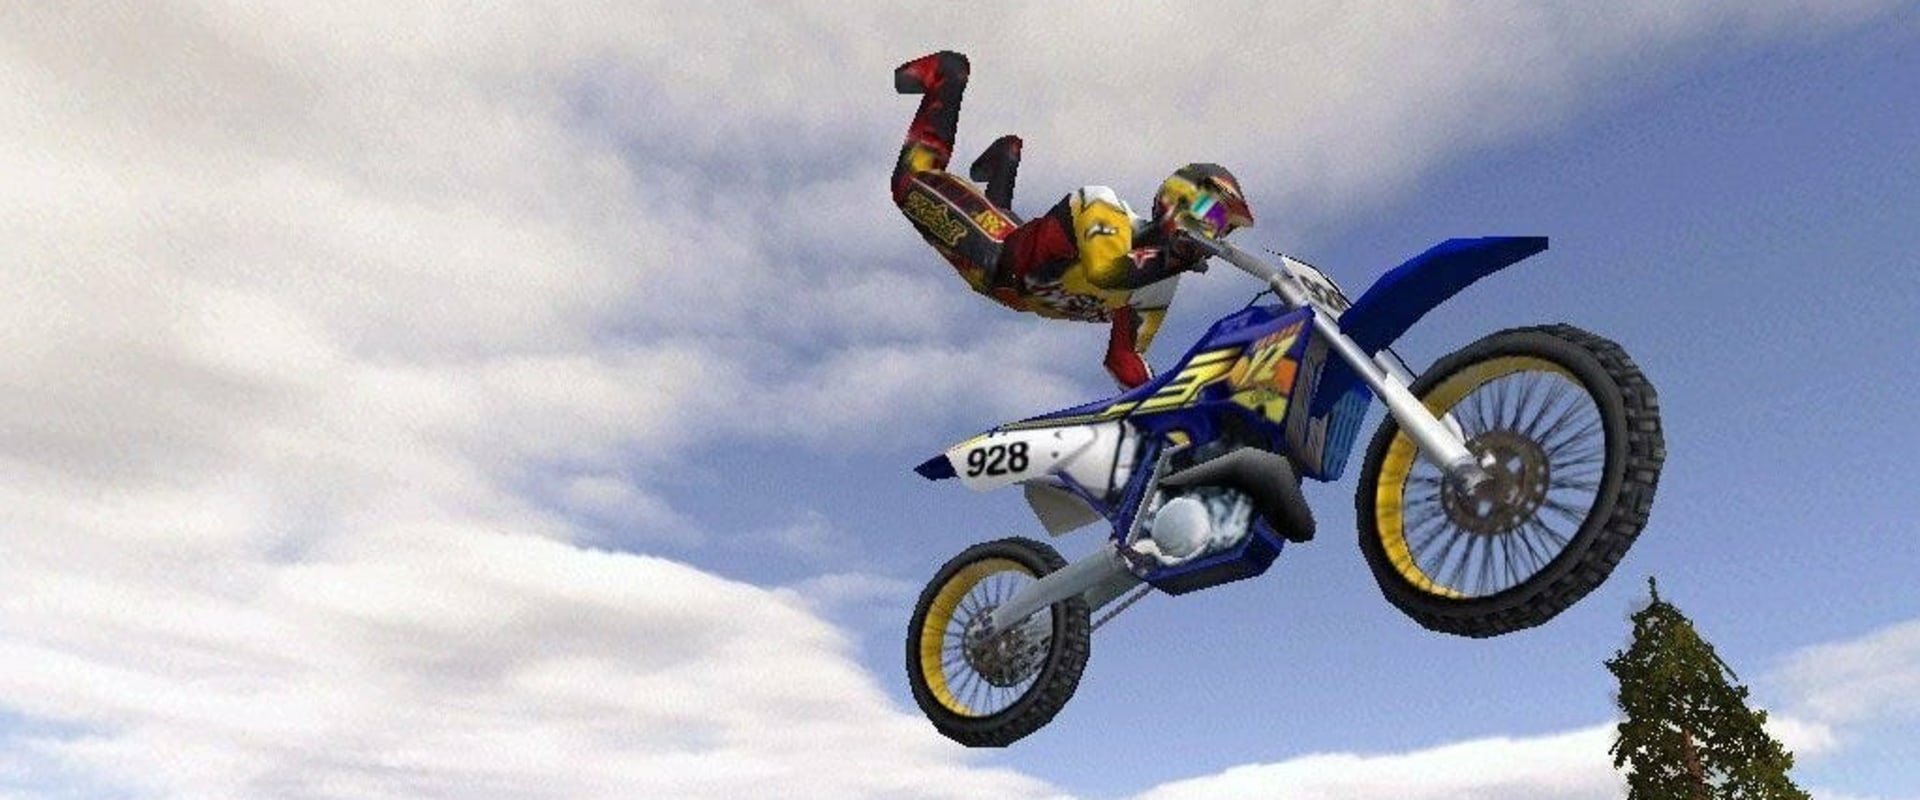 Top PC Action-Adventure Games With a Focus on Motocross in 2021